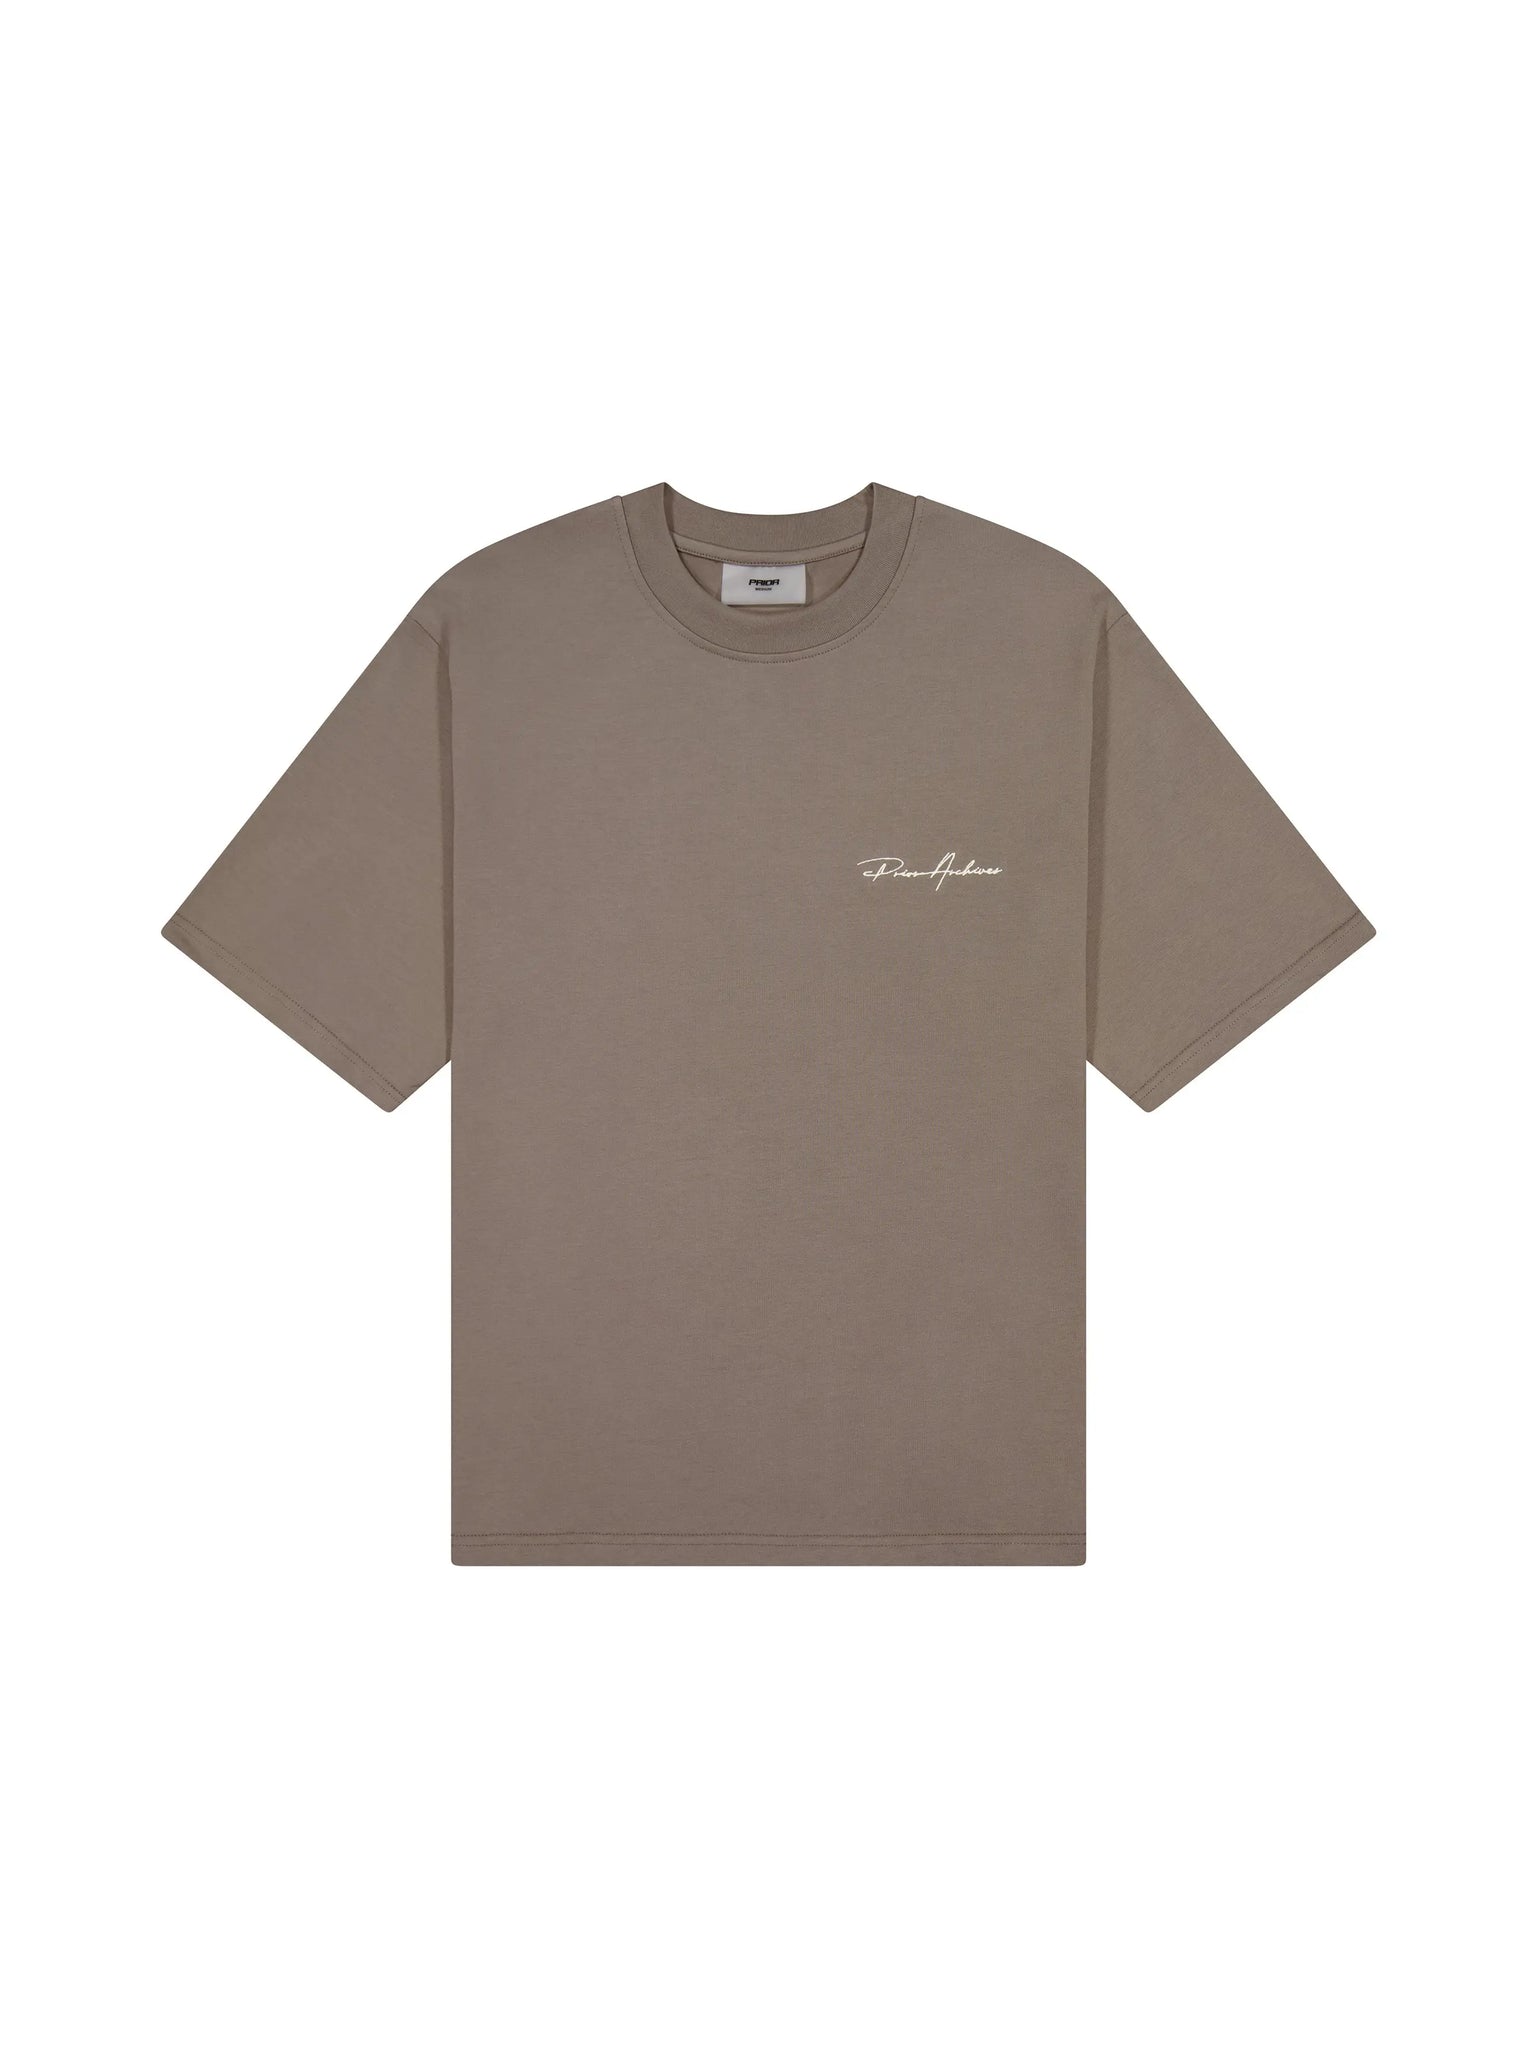 Prior Embroidery Logo Oversized T-shirt Clay Brown in Auckland, New Zealand - Shop name